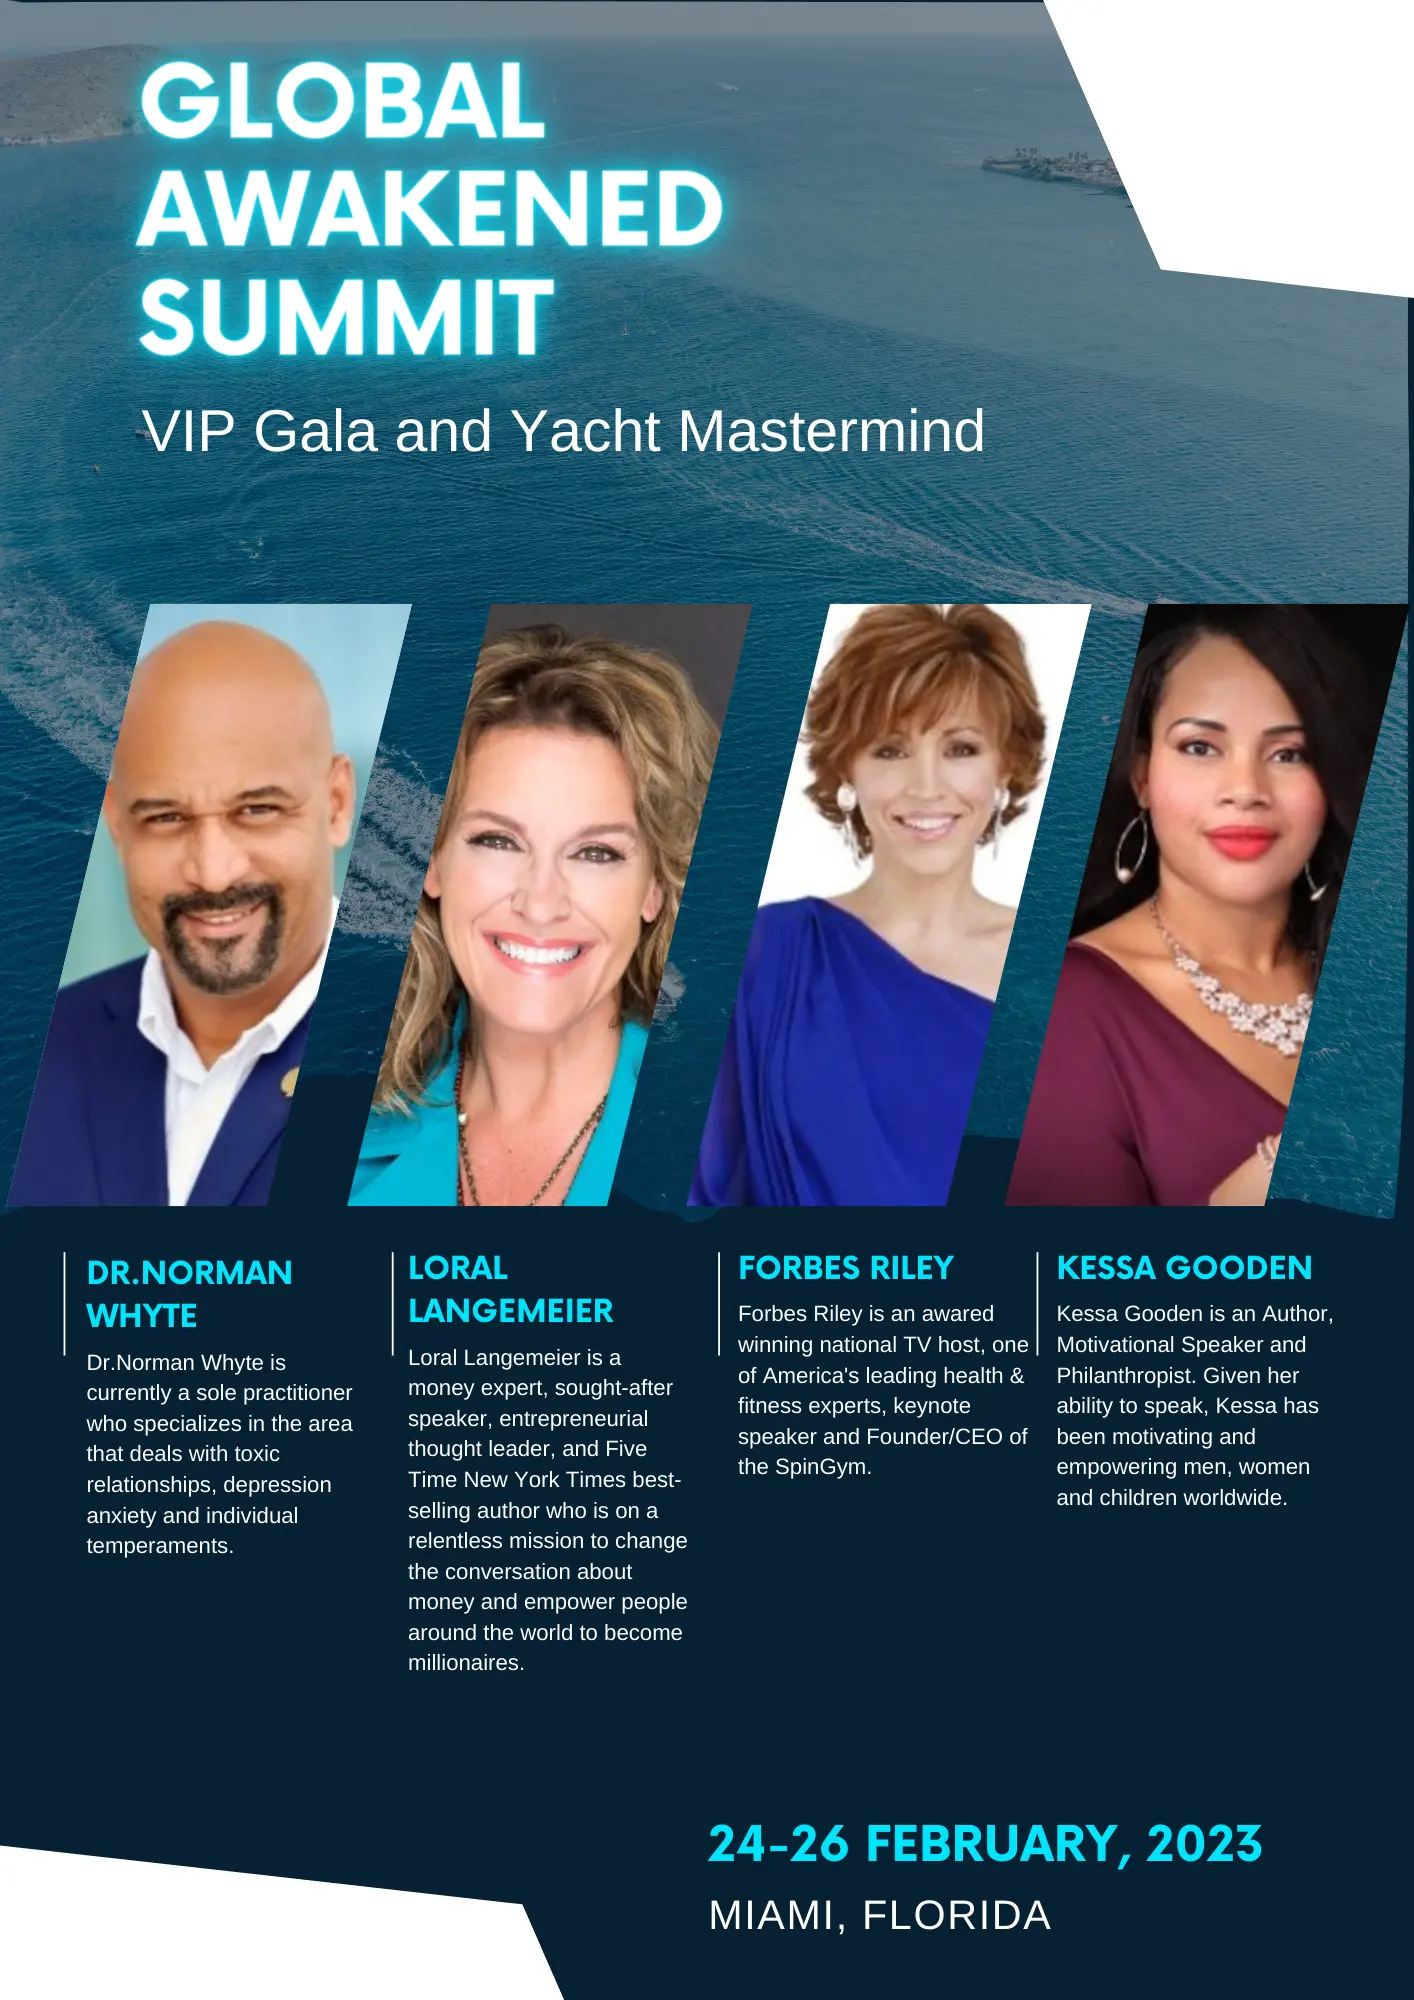 Global Awakened Initiative Comes Back with Another Encore Event in Miramar FL, Offering an Opportunity to Meet Business Rockstars from Different Industries